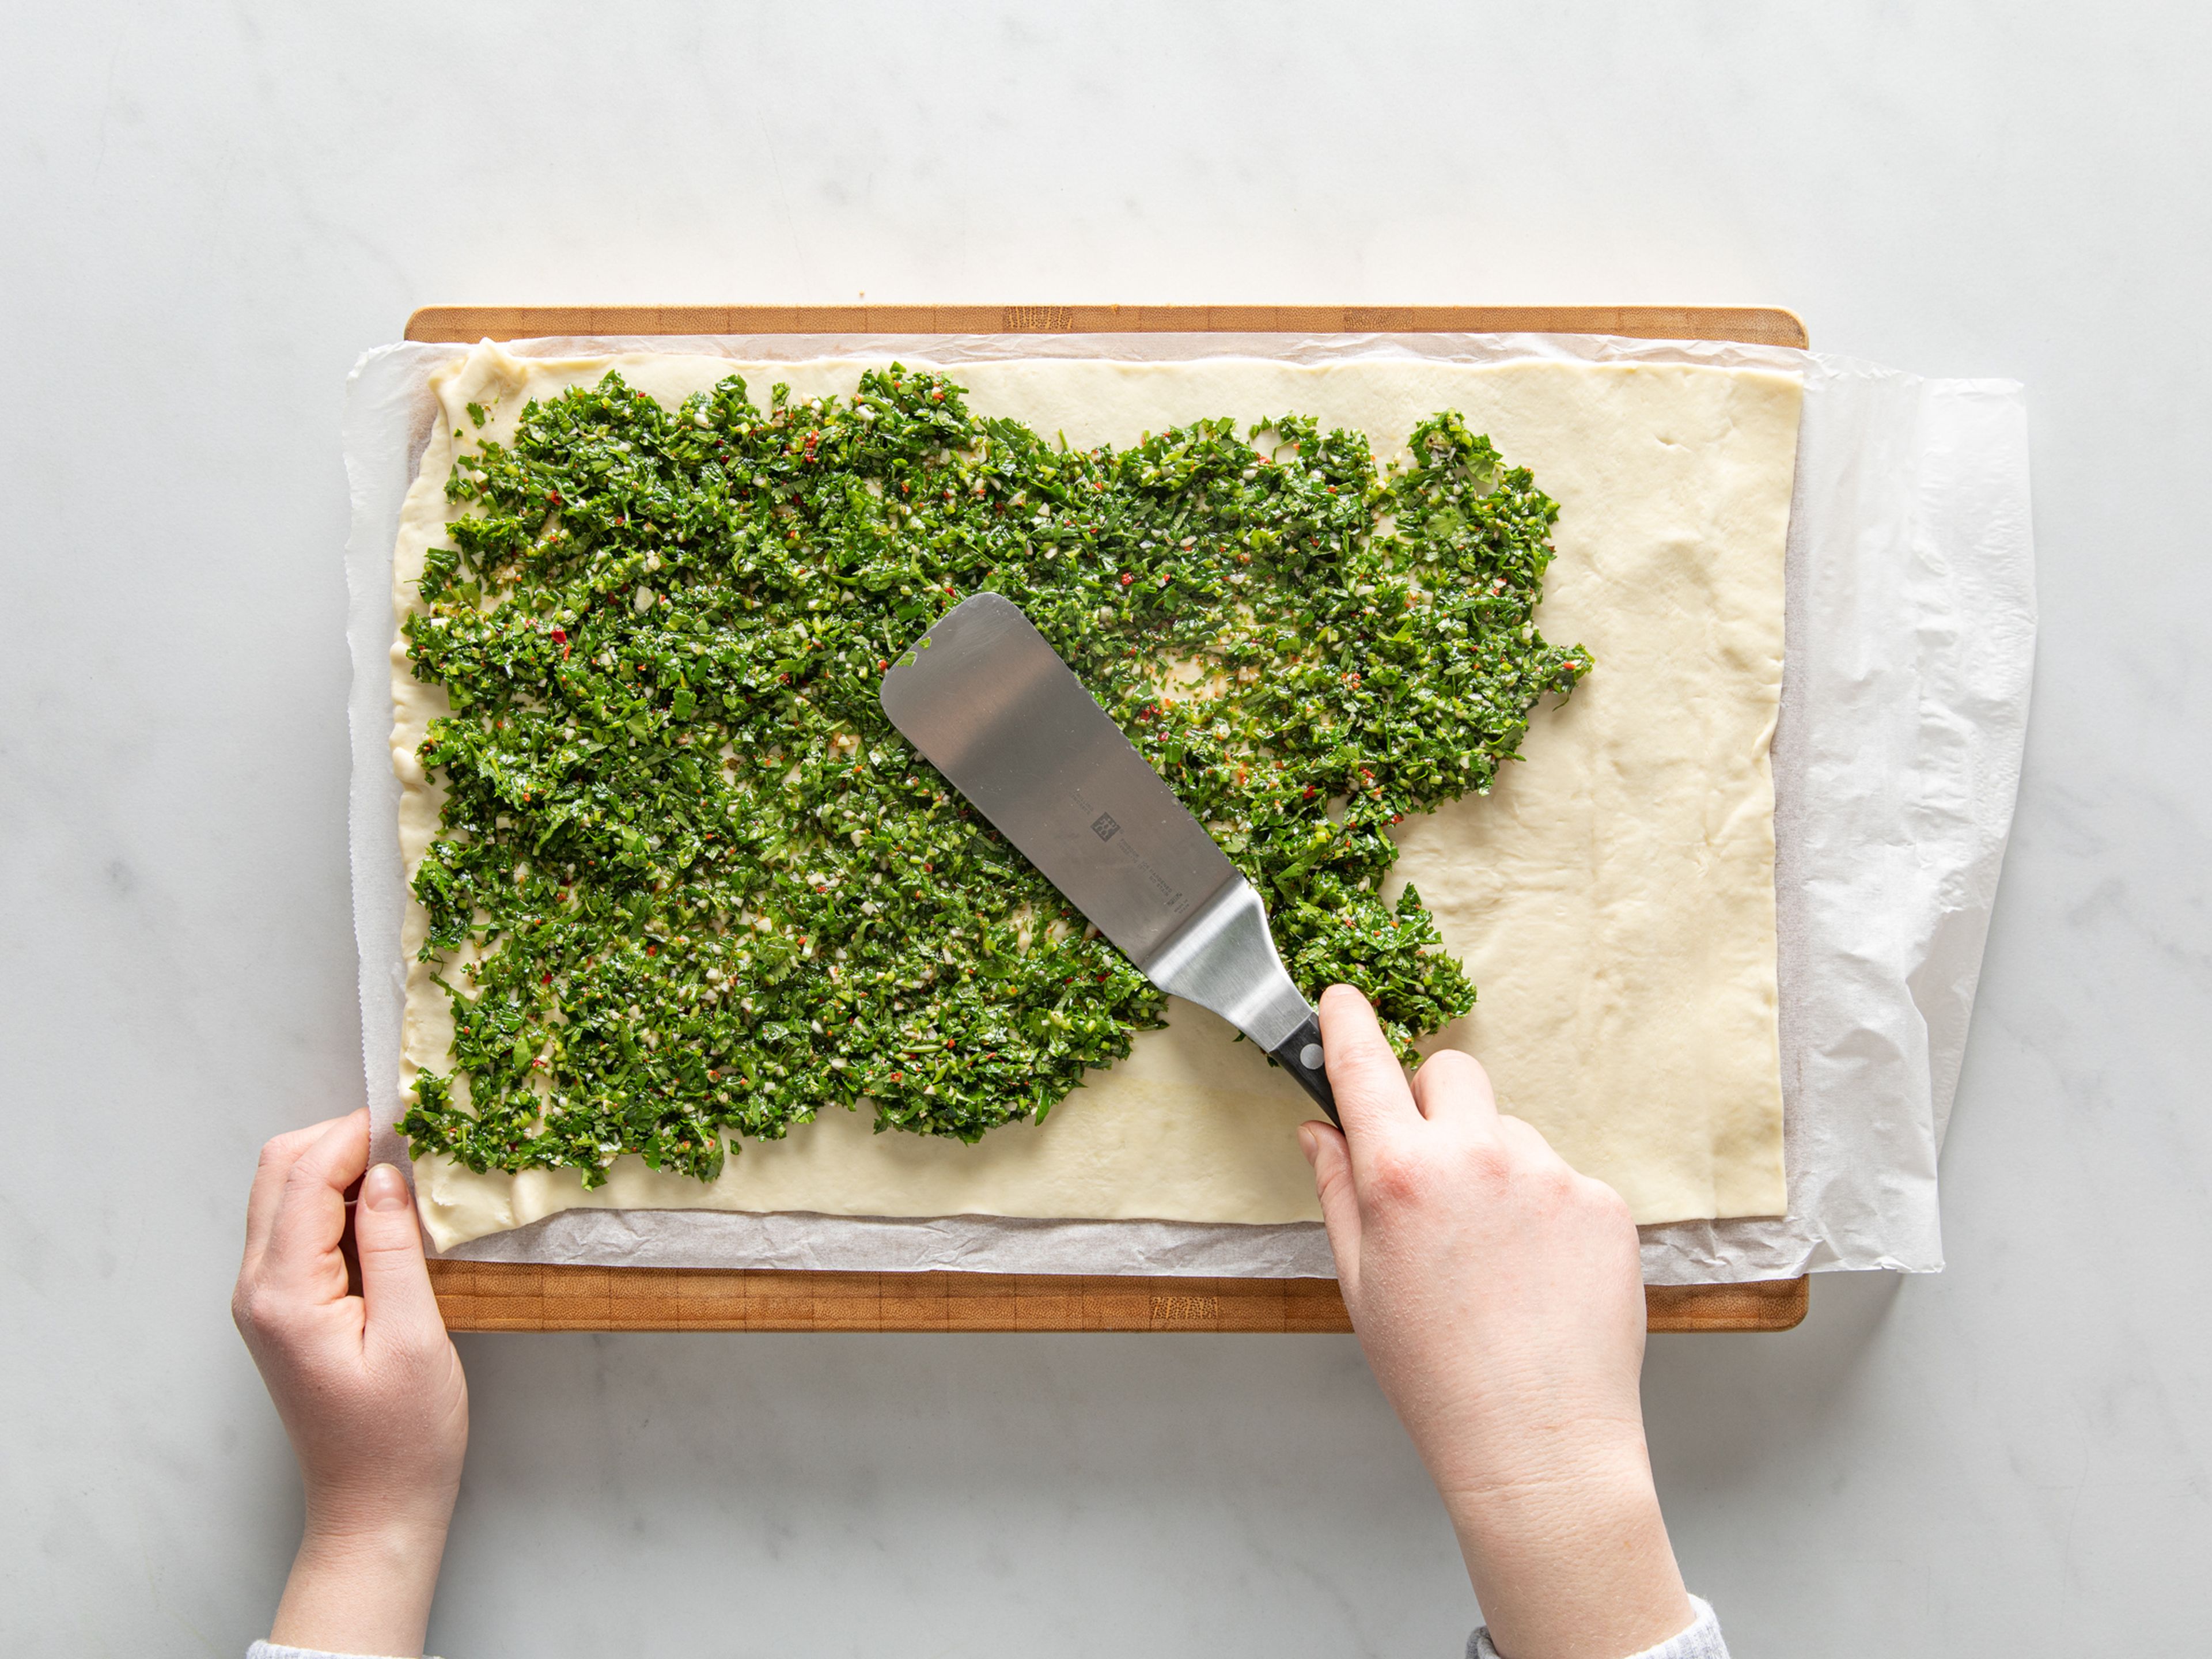 Lay out the puff pastry on a floured work surface. Spread chimichurri evenly over the top, leaving a 2.5 cm-wide strip along the top edge, untouched. Grate cheddar over everything and sprinkle with olives and chopped onion. Roll pastry into a tight log, then cut into 4 cm-wide discs.